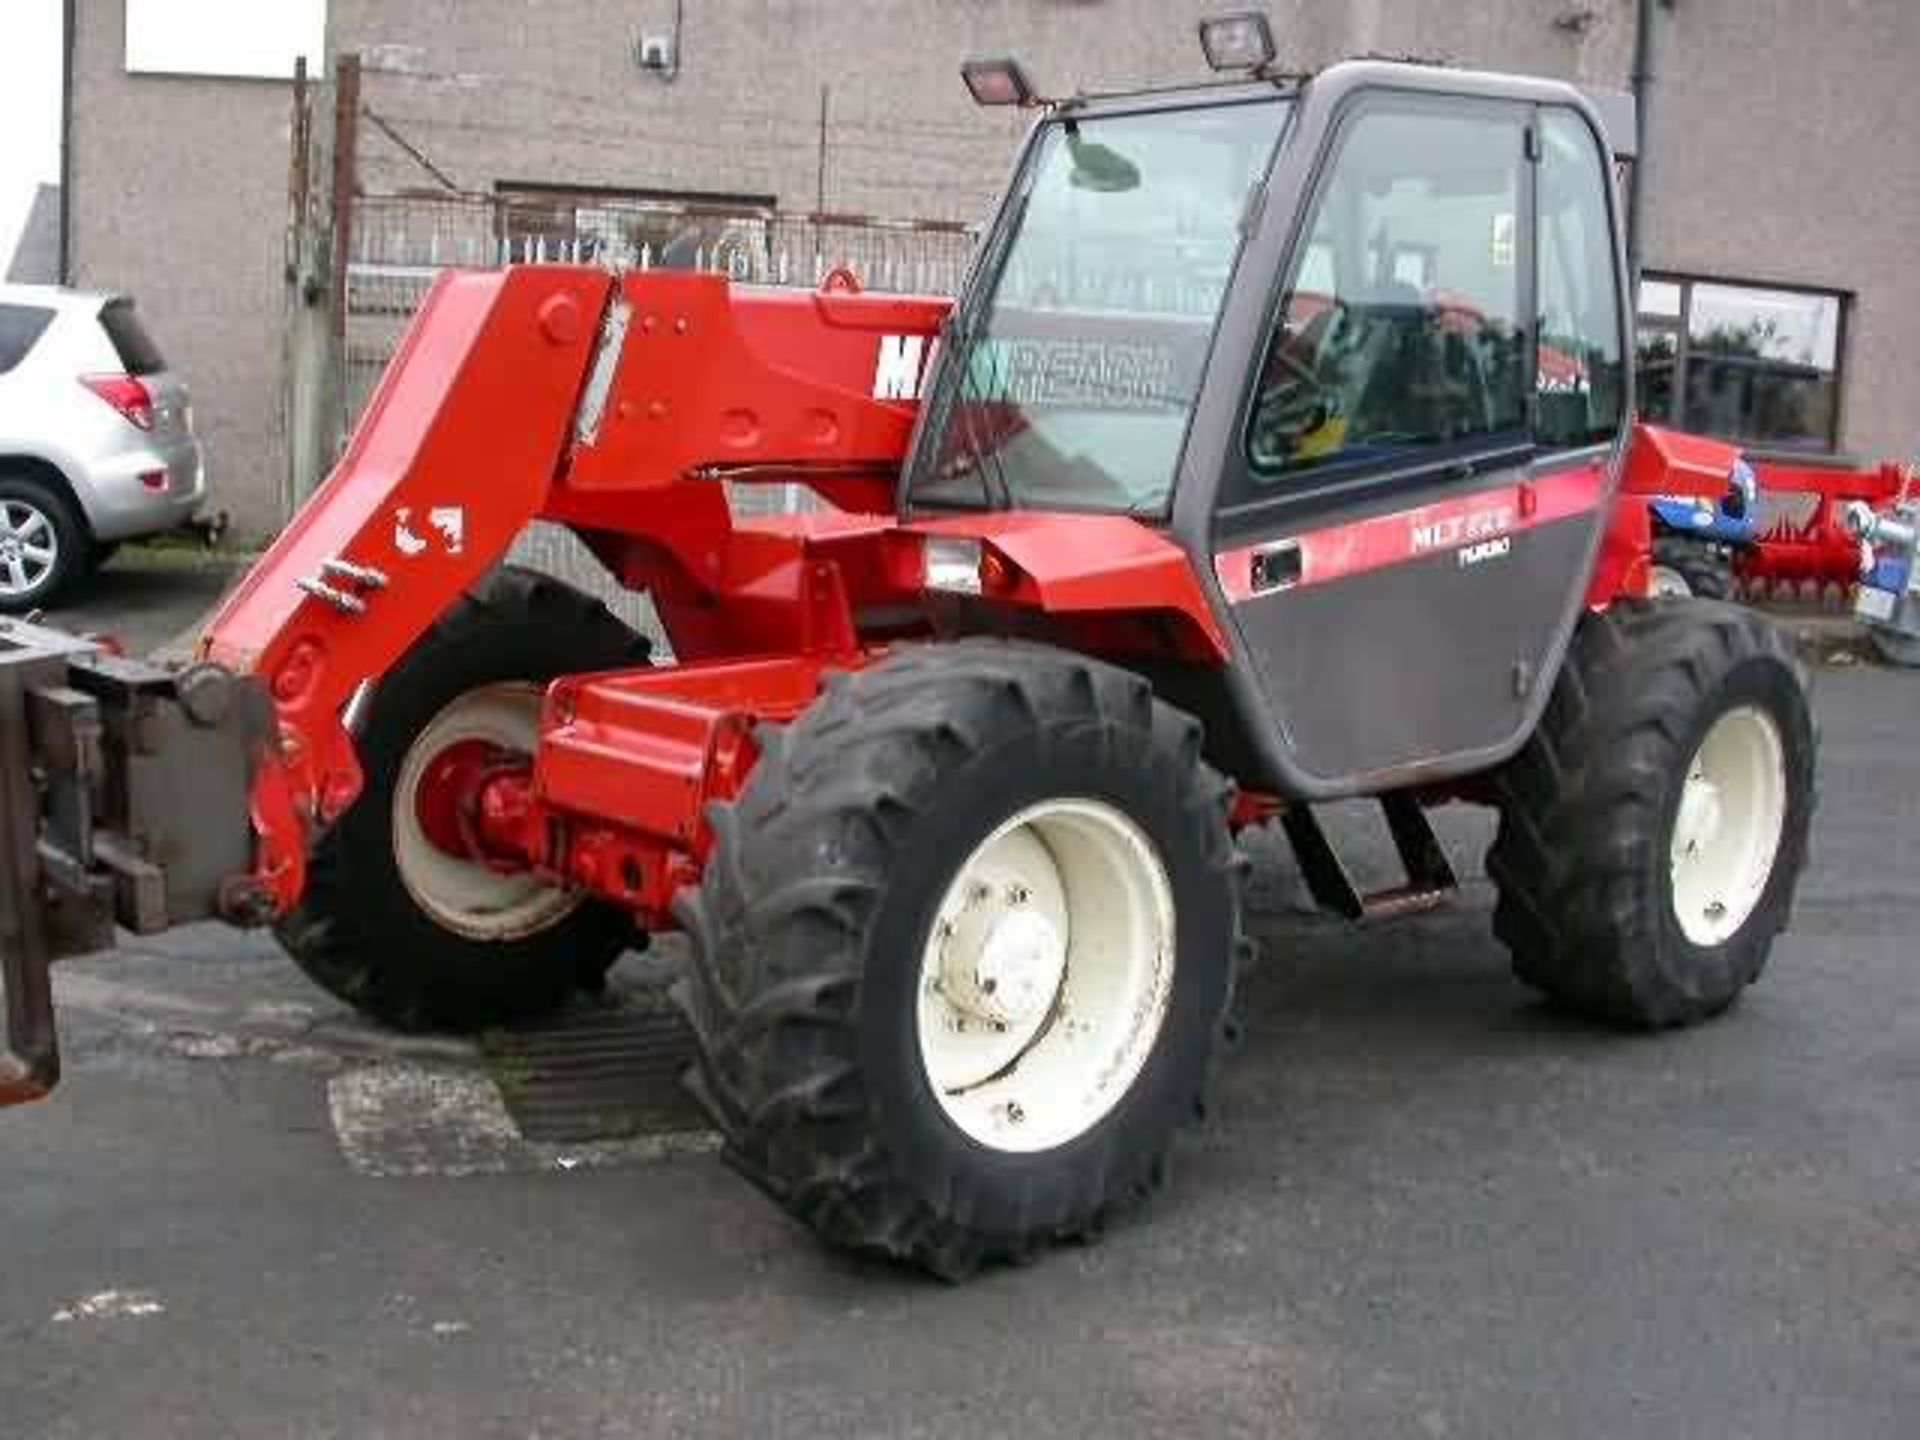 1998 Manitou 628 Turbo with Pick Up Hitch - Image 2 of 5